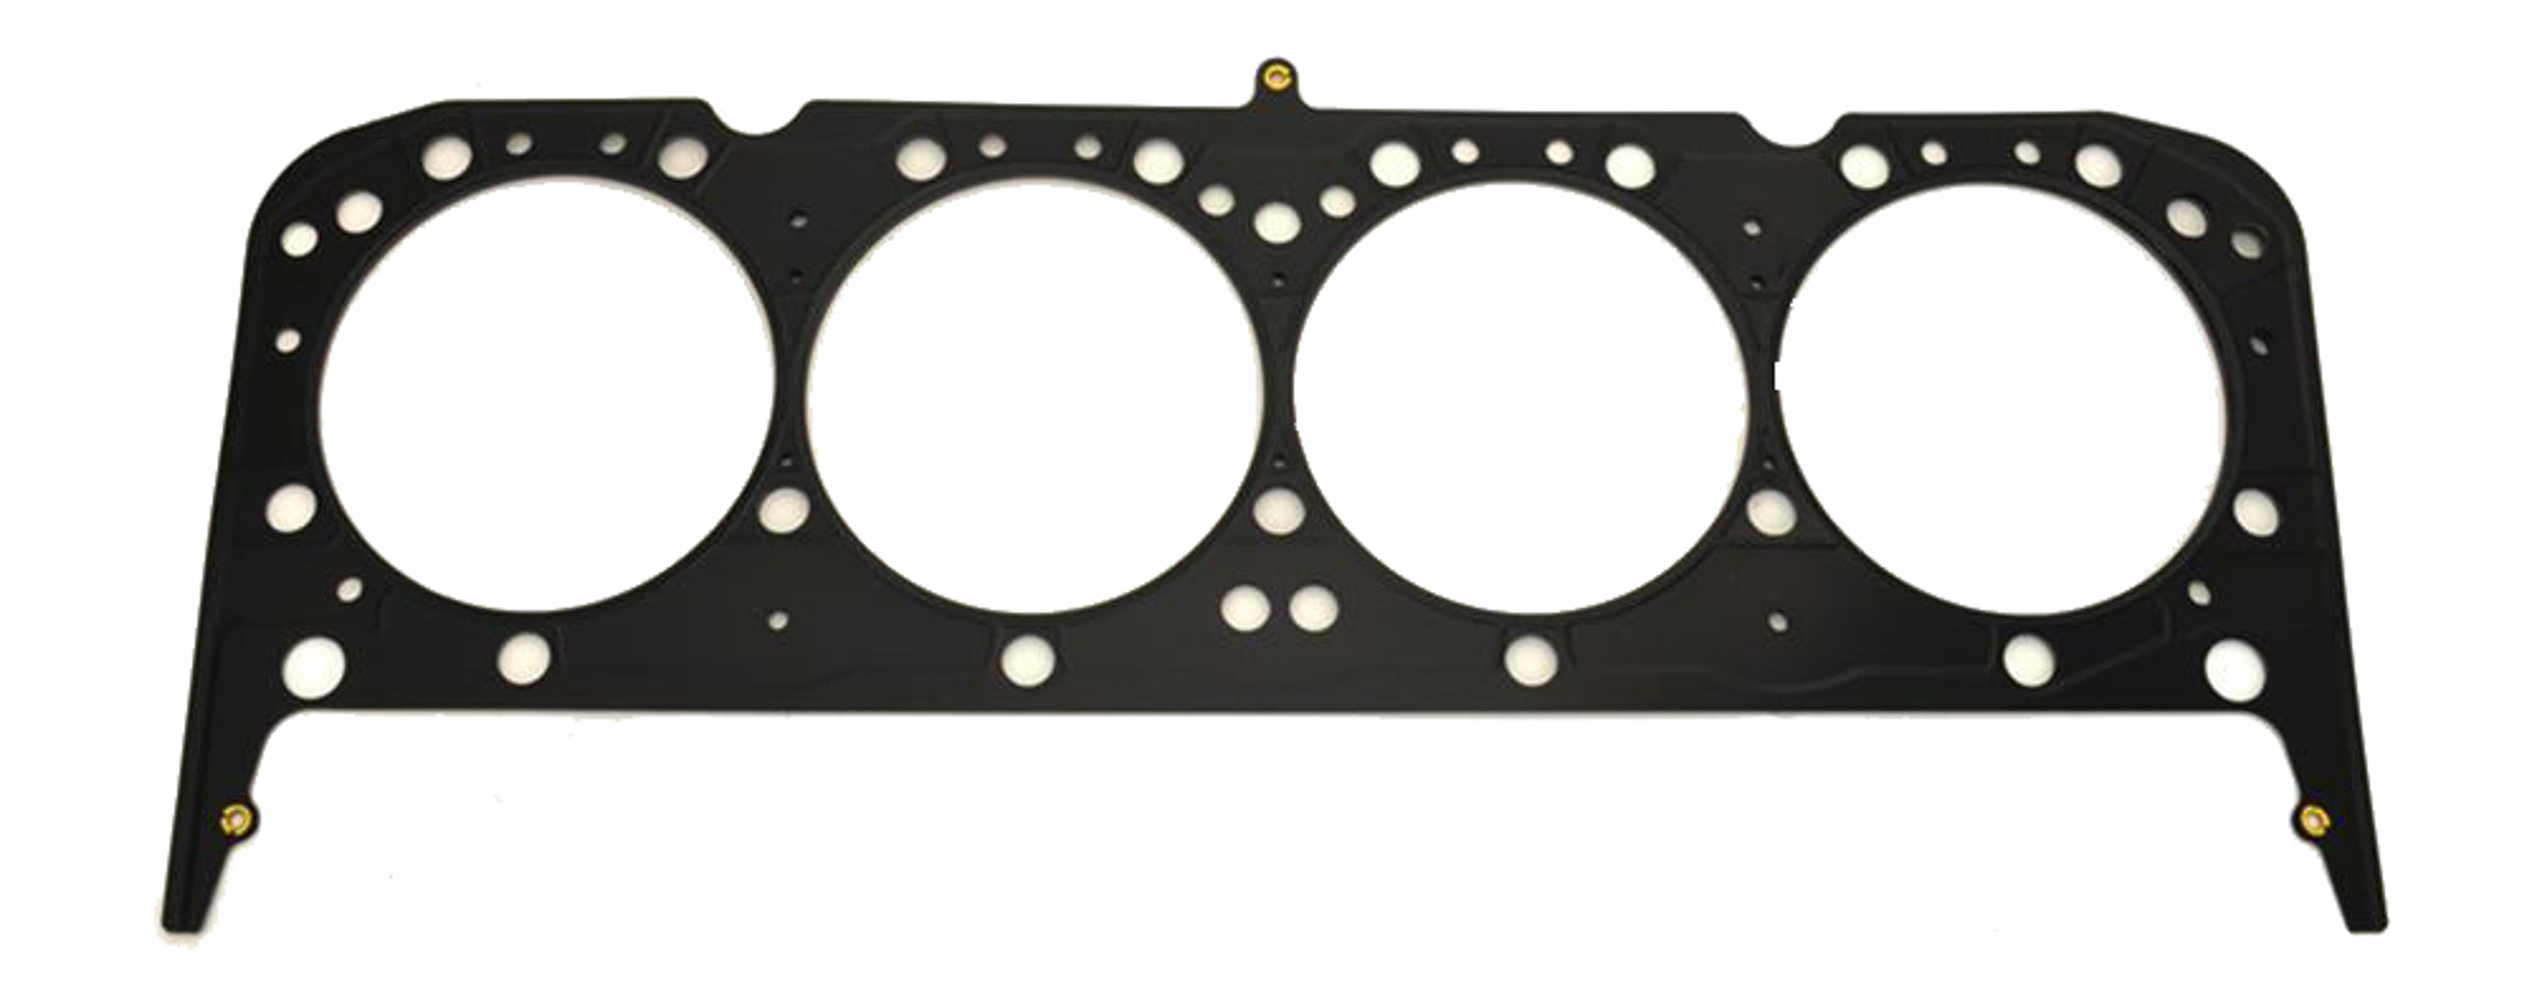 SCE Gaskets M111339 - Cylinder Head Gasket, MLS Spartan, 4.134 in Bore, 0.039 in Compression Thickness, Multi-Layer Steel, Small Block Chevy, Each